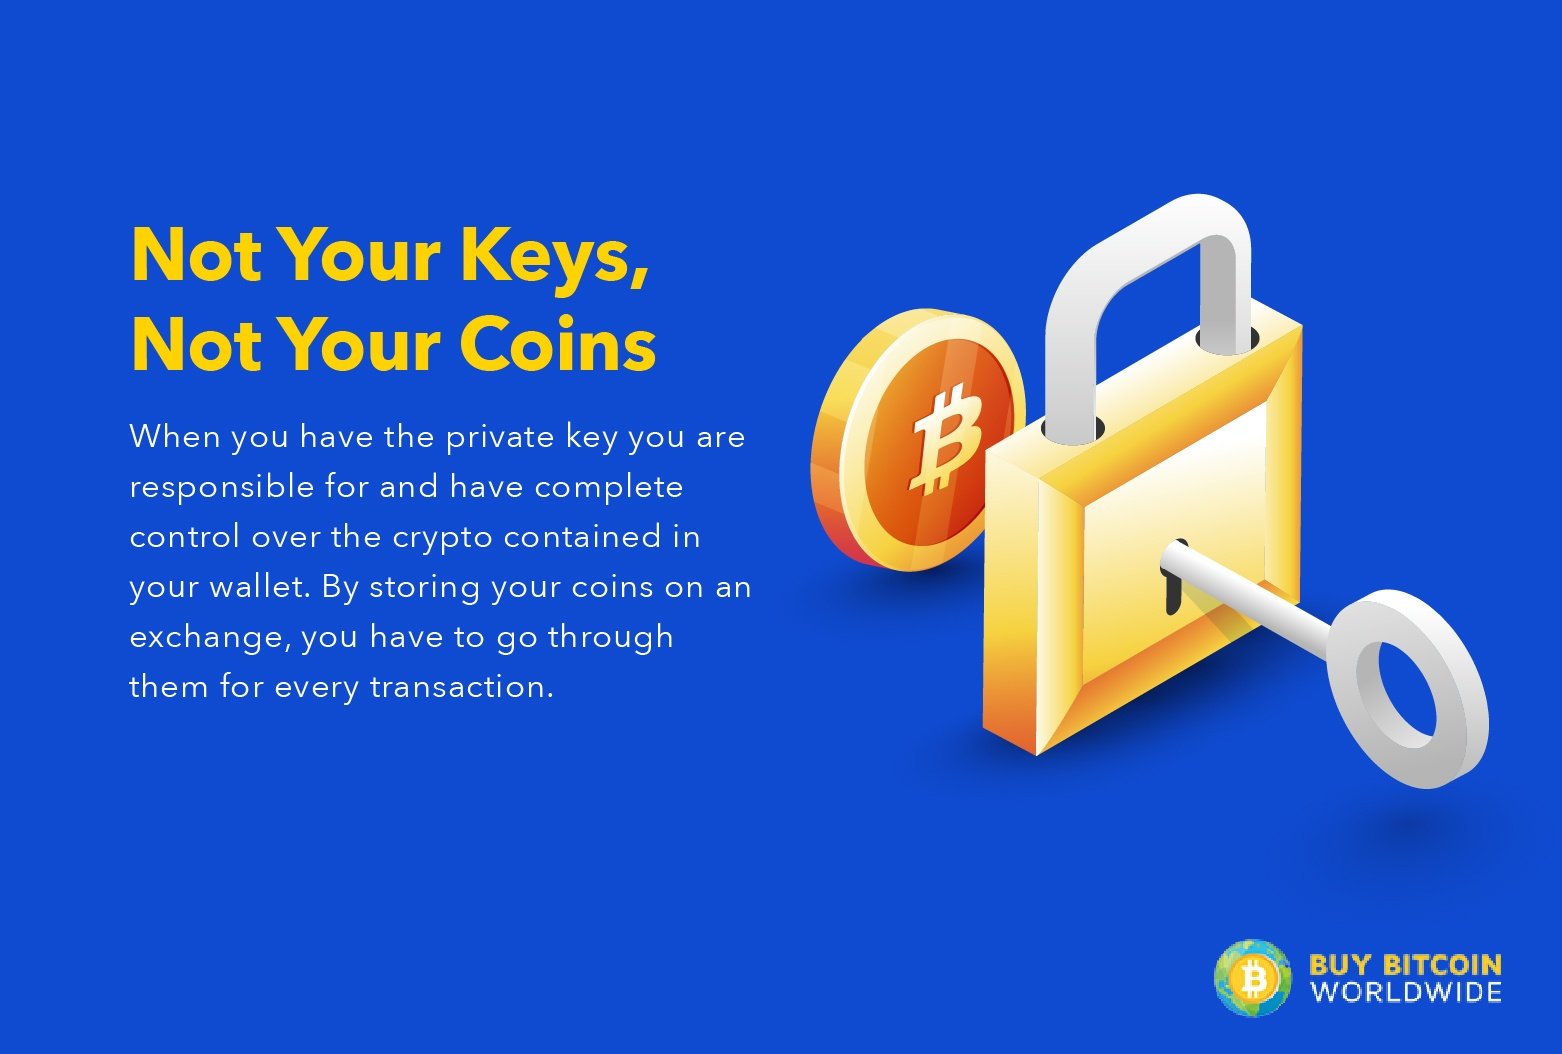 Not Your Keys, Not Your Coins